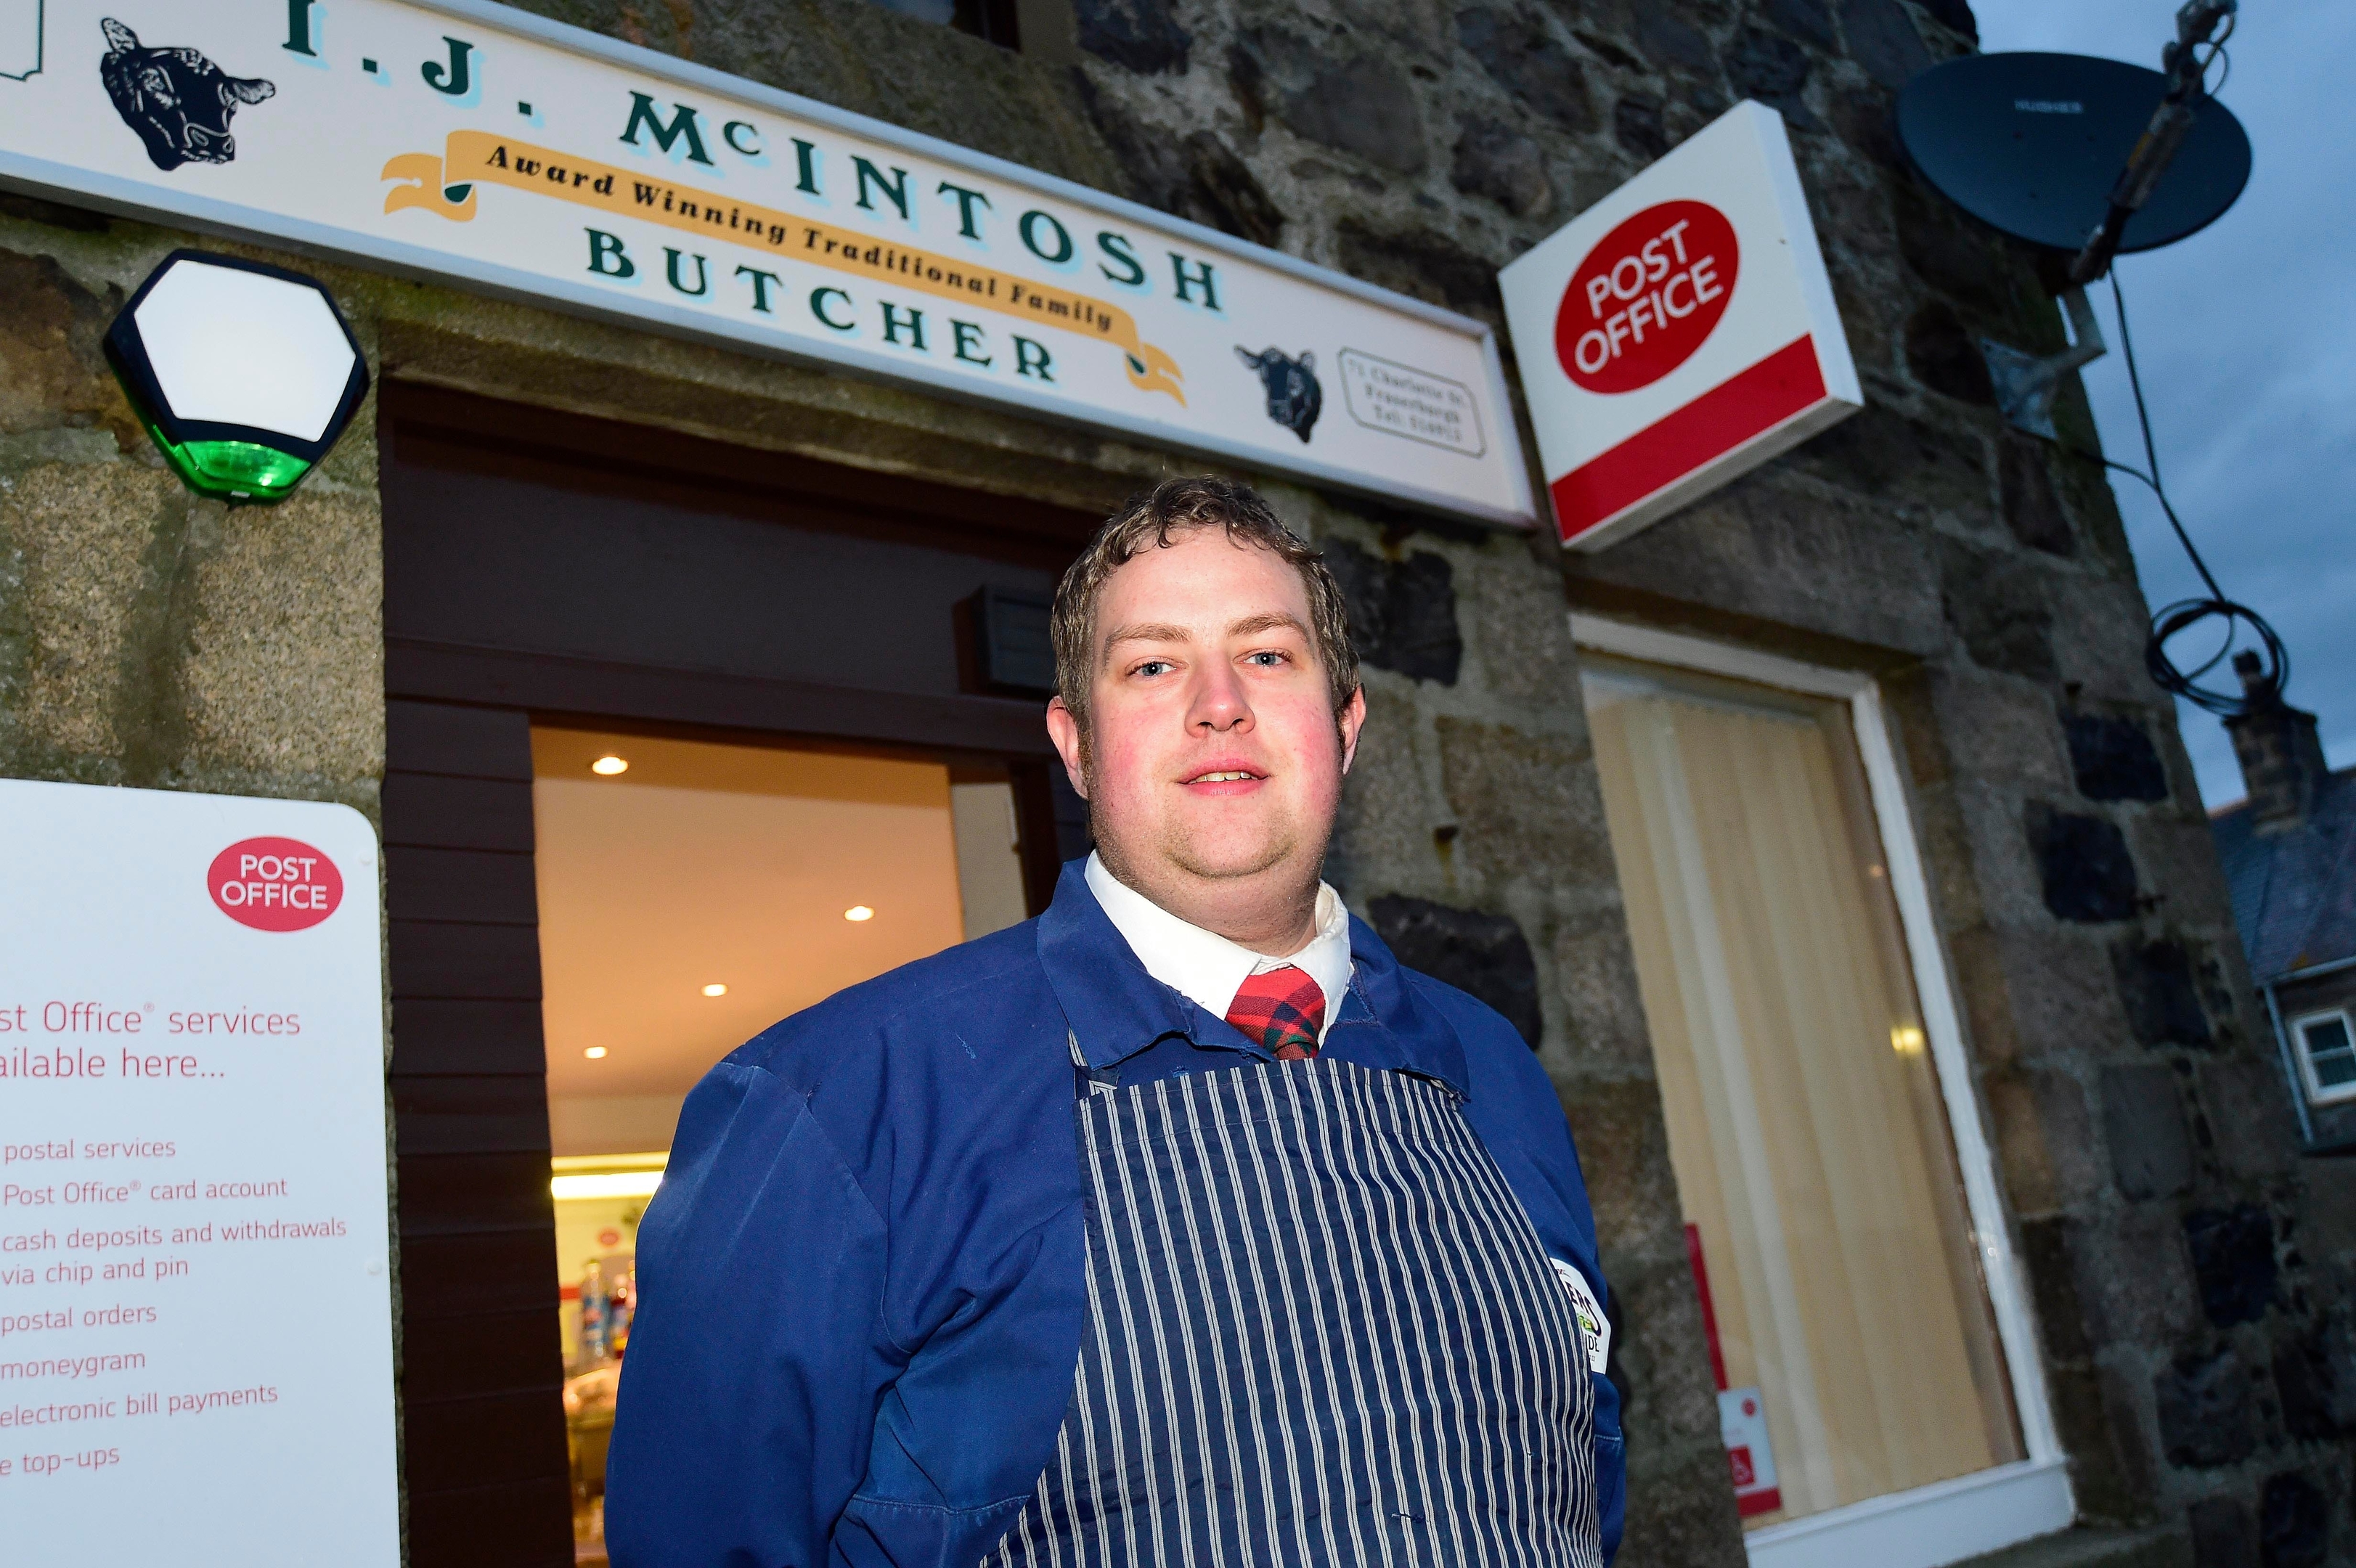 Rosehearty butcher Gavin McIntosh is spearheading the campaign